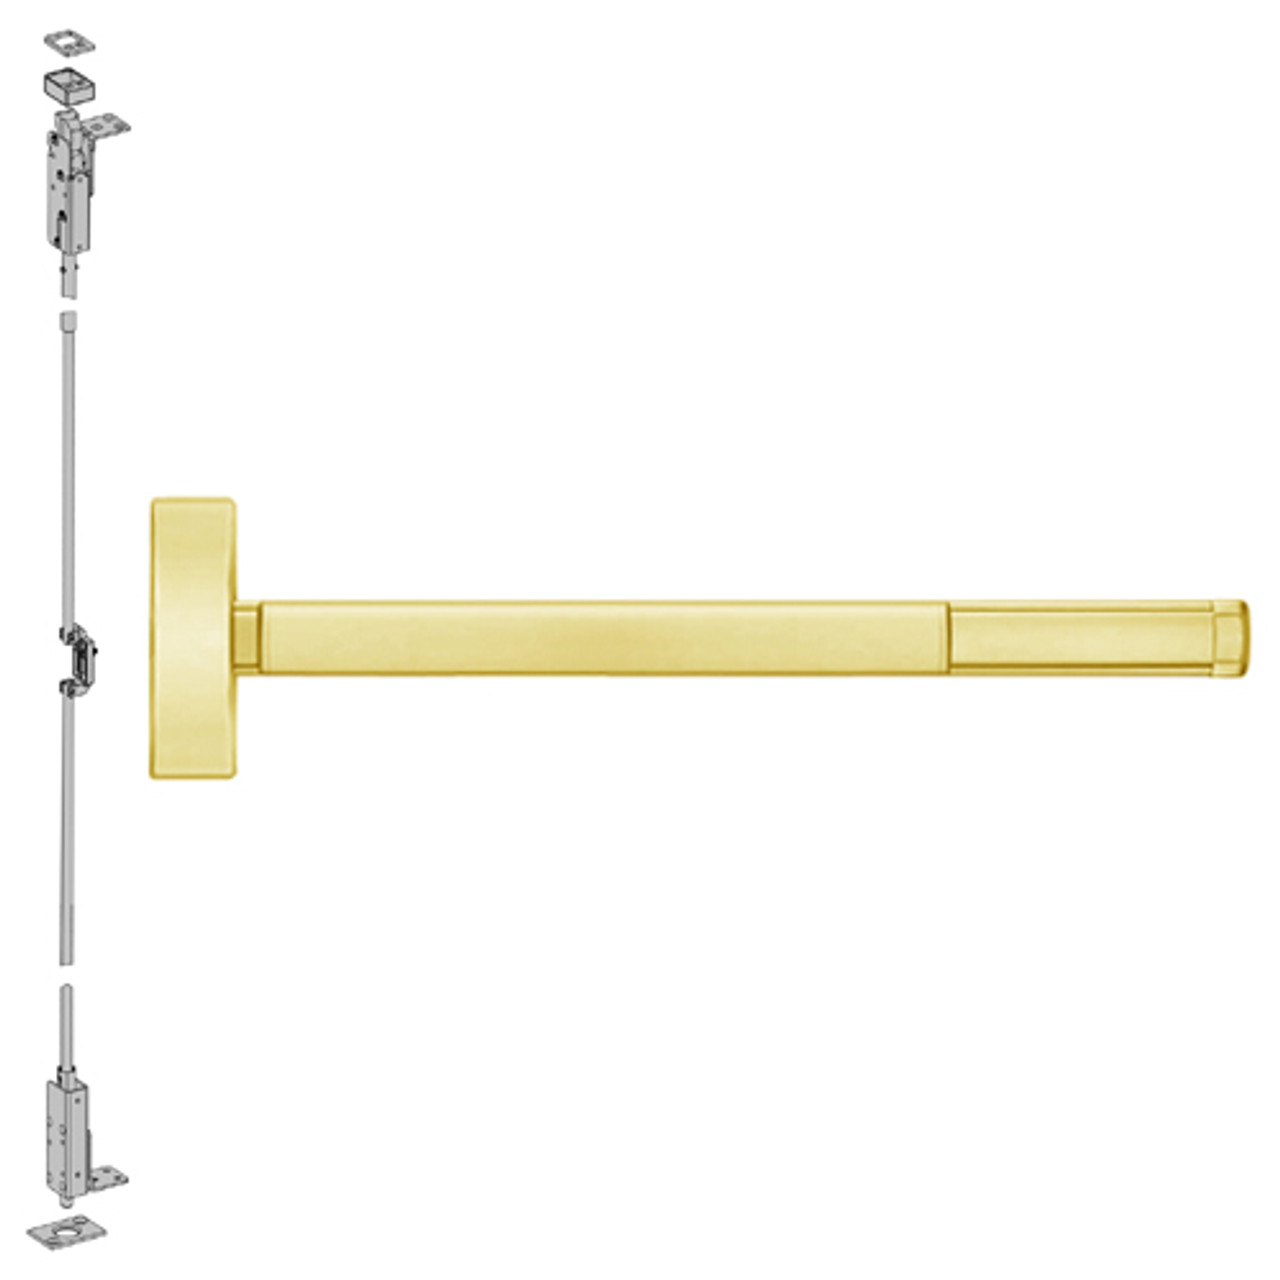 MLRFL2715-605-36 PHI 2700 Series Wood Door Concealed Vertical Exit Device with Motorized Latch Retraction Prepped for Thumbpiece Always Active in Bright Brass Finish